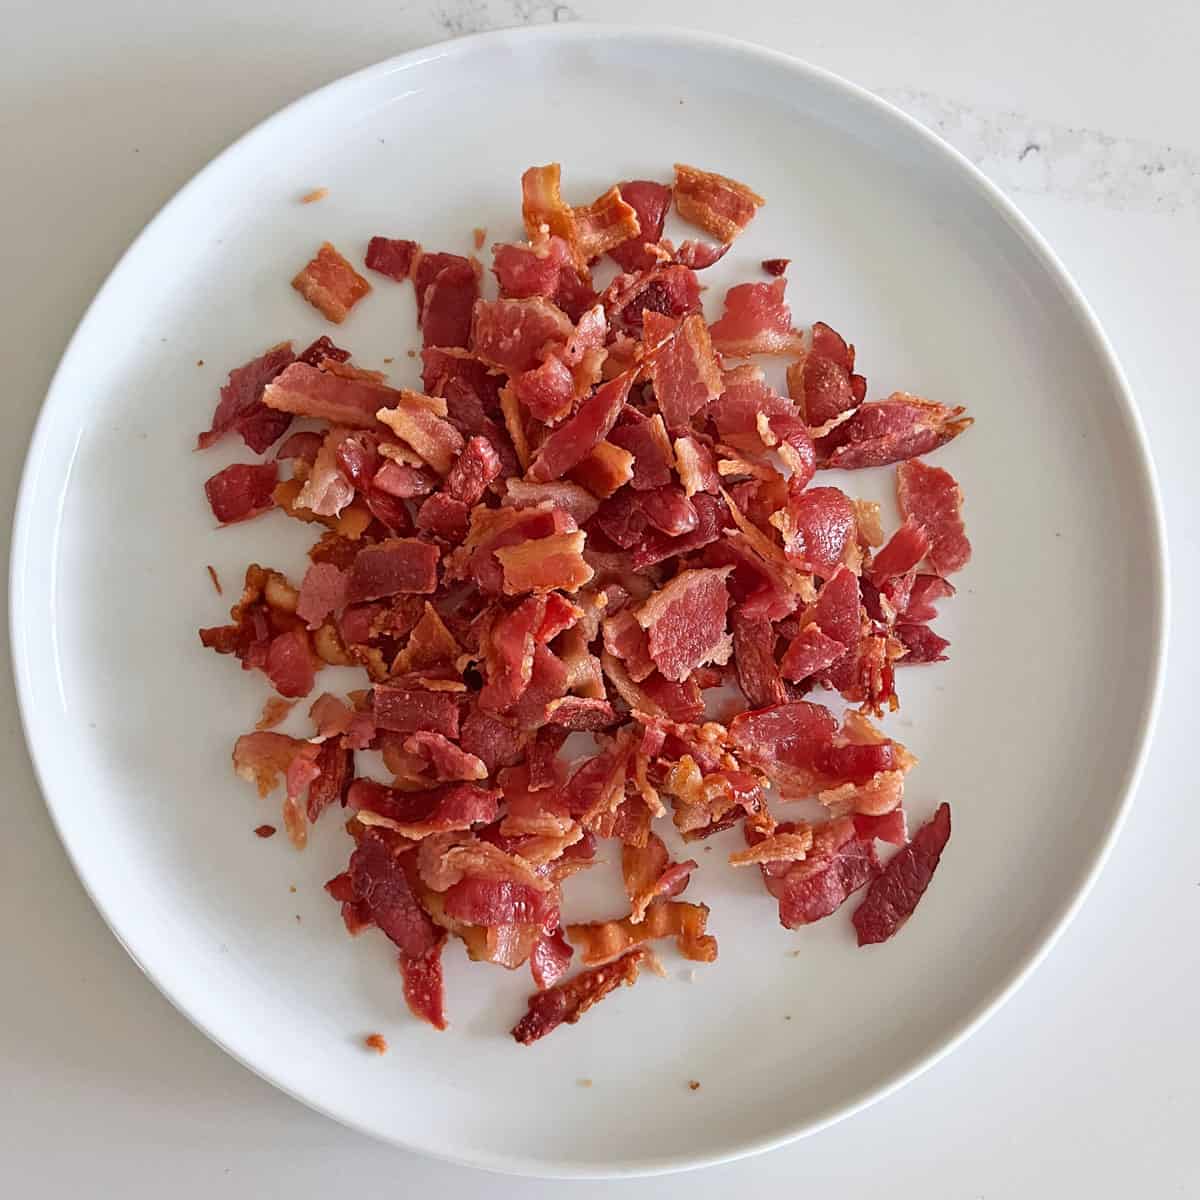 Chopped bacon on a plate.